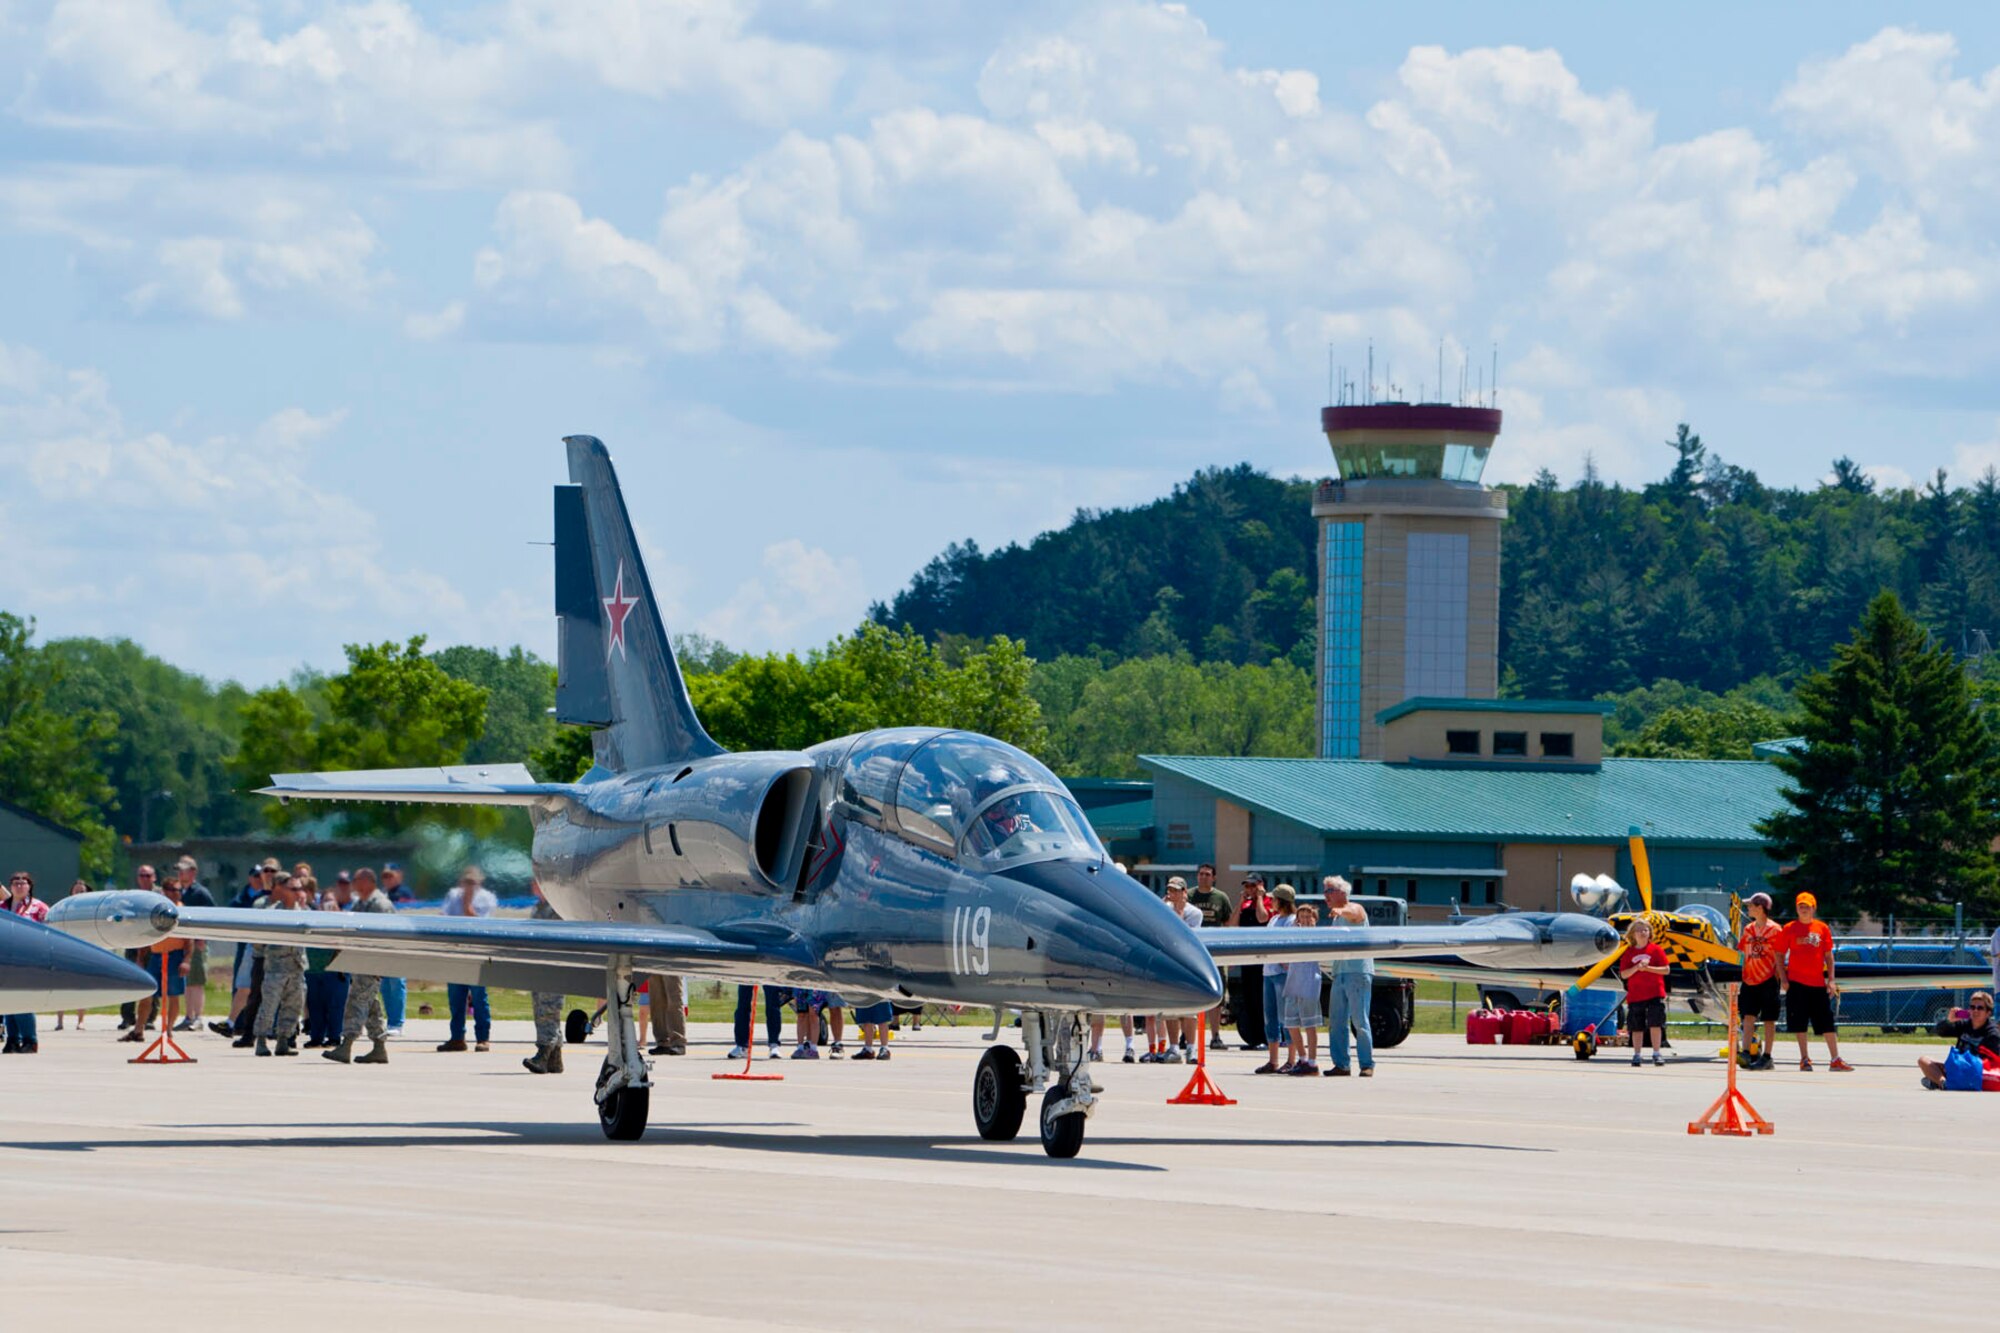 L-39 Albatross jet of the Hoppers taxis at the start of their performance with the Volk Field Control Tower in the background, June 2, 2012.  Photo by Joe Oliva, Jetpix.com